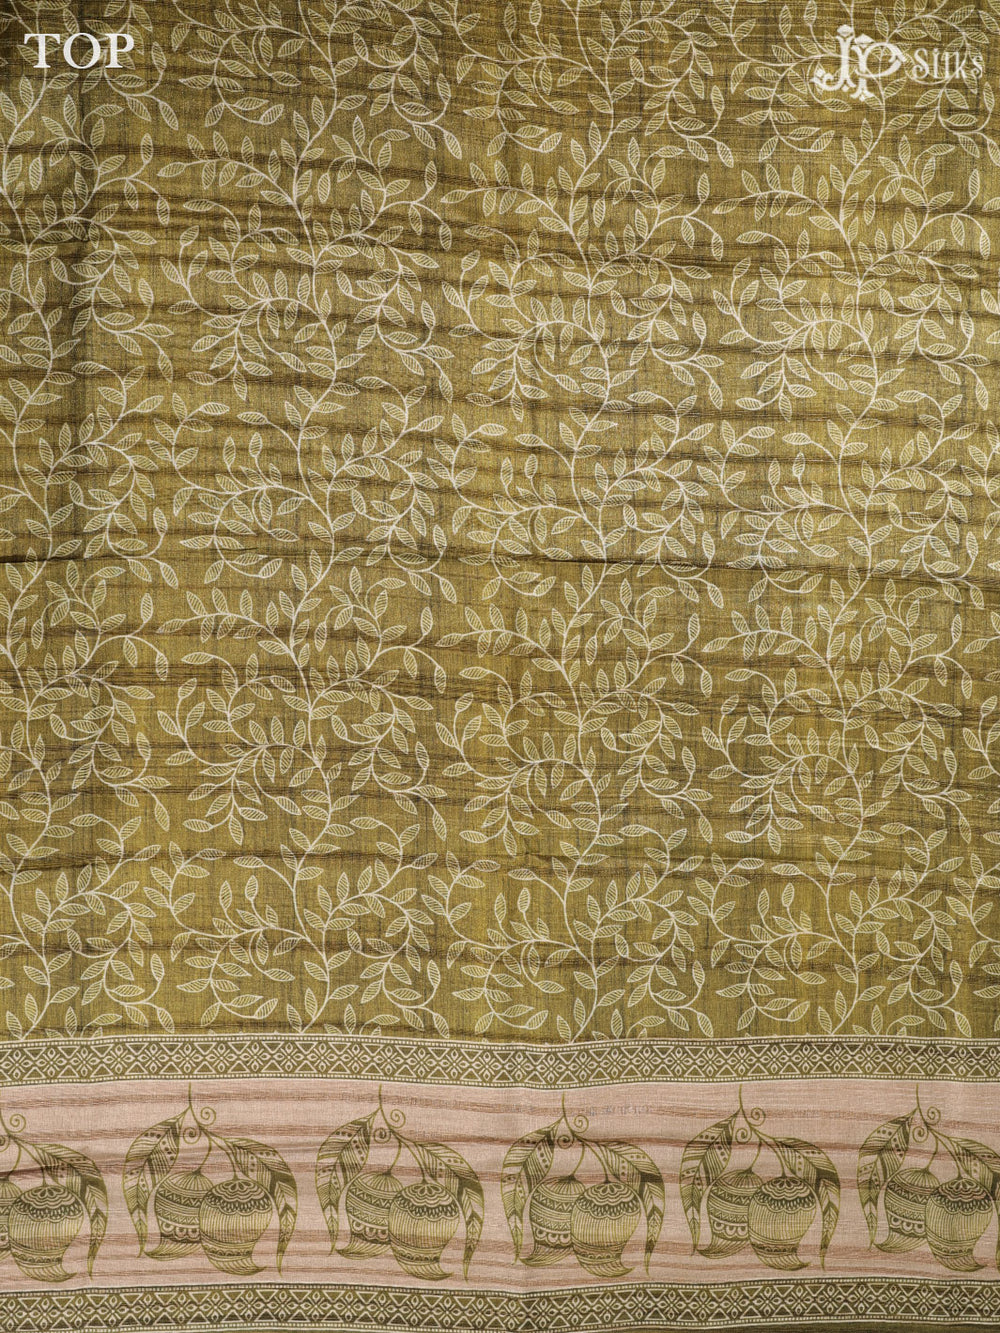 Green and Sandal Tussar Unstiched Chudidhar Material - E1015 - View 2